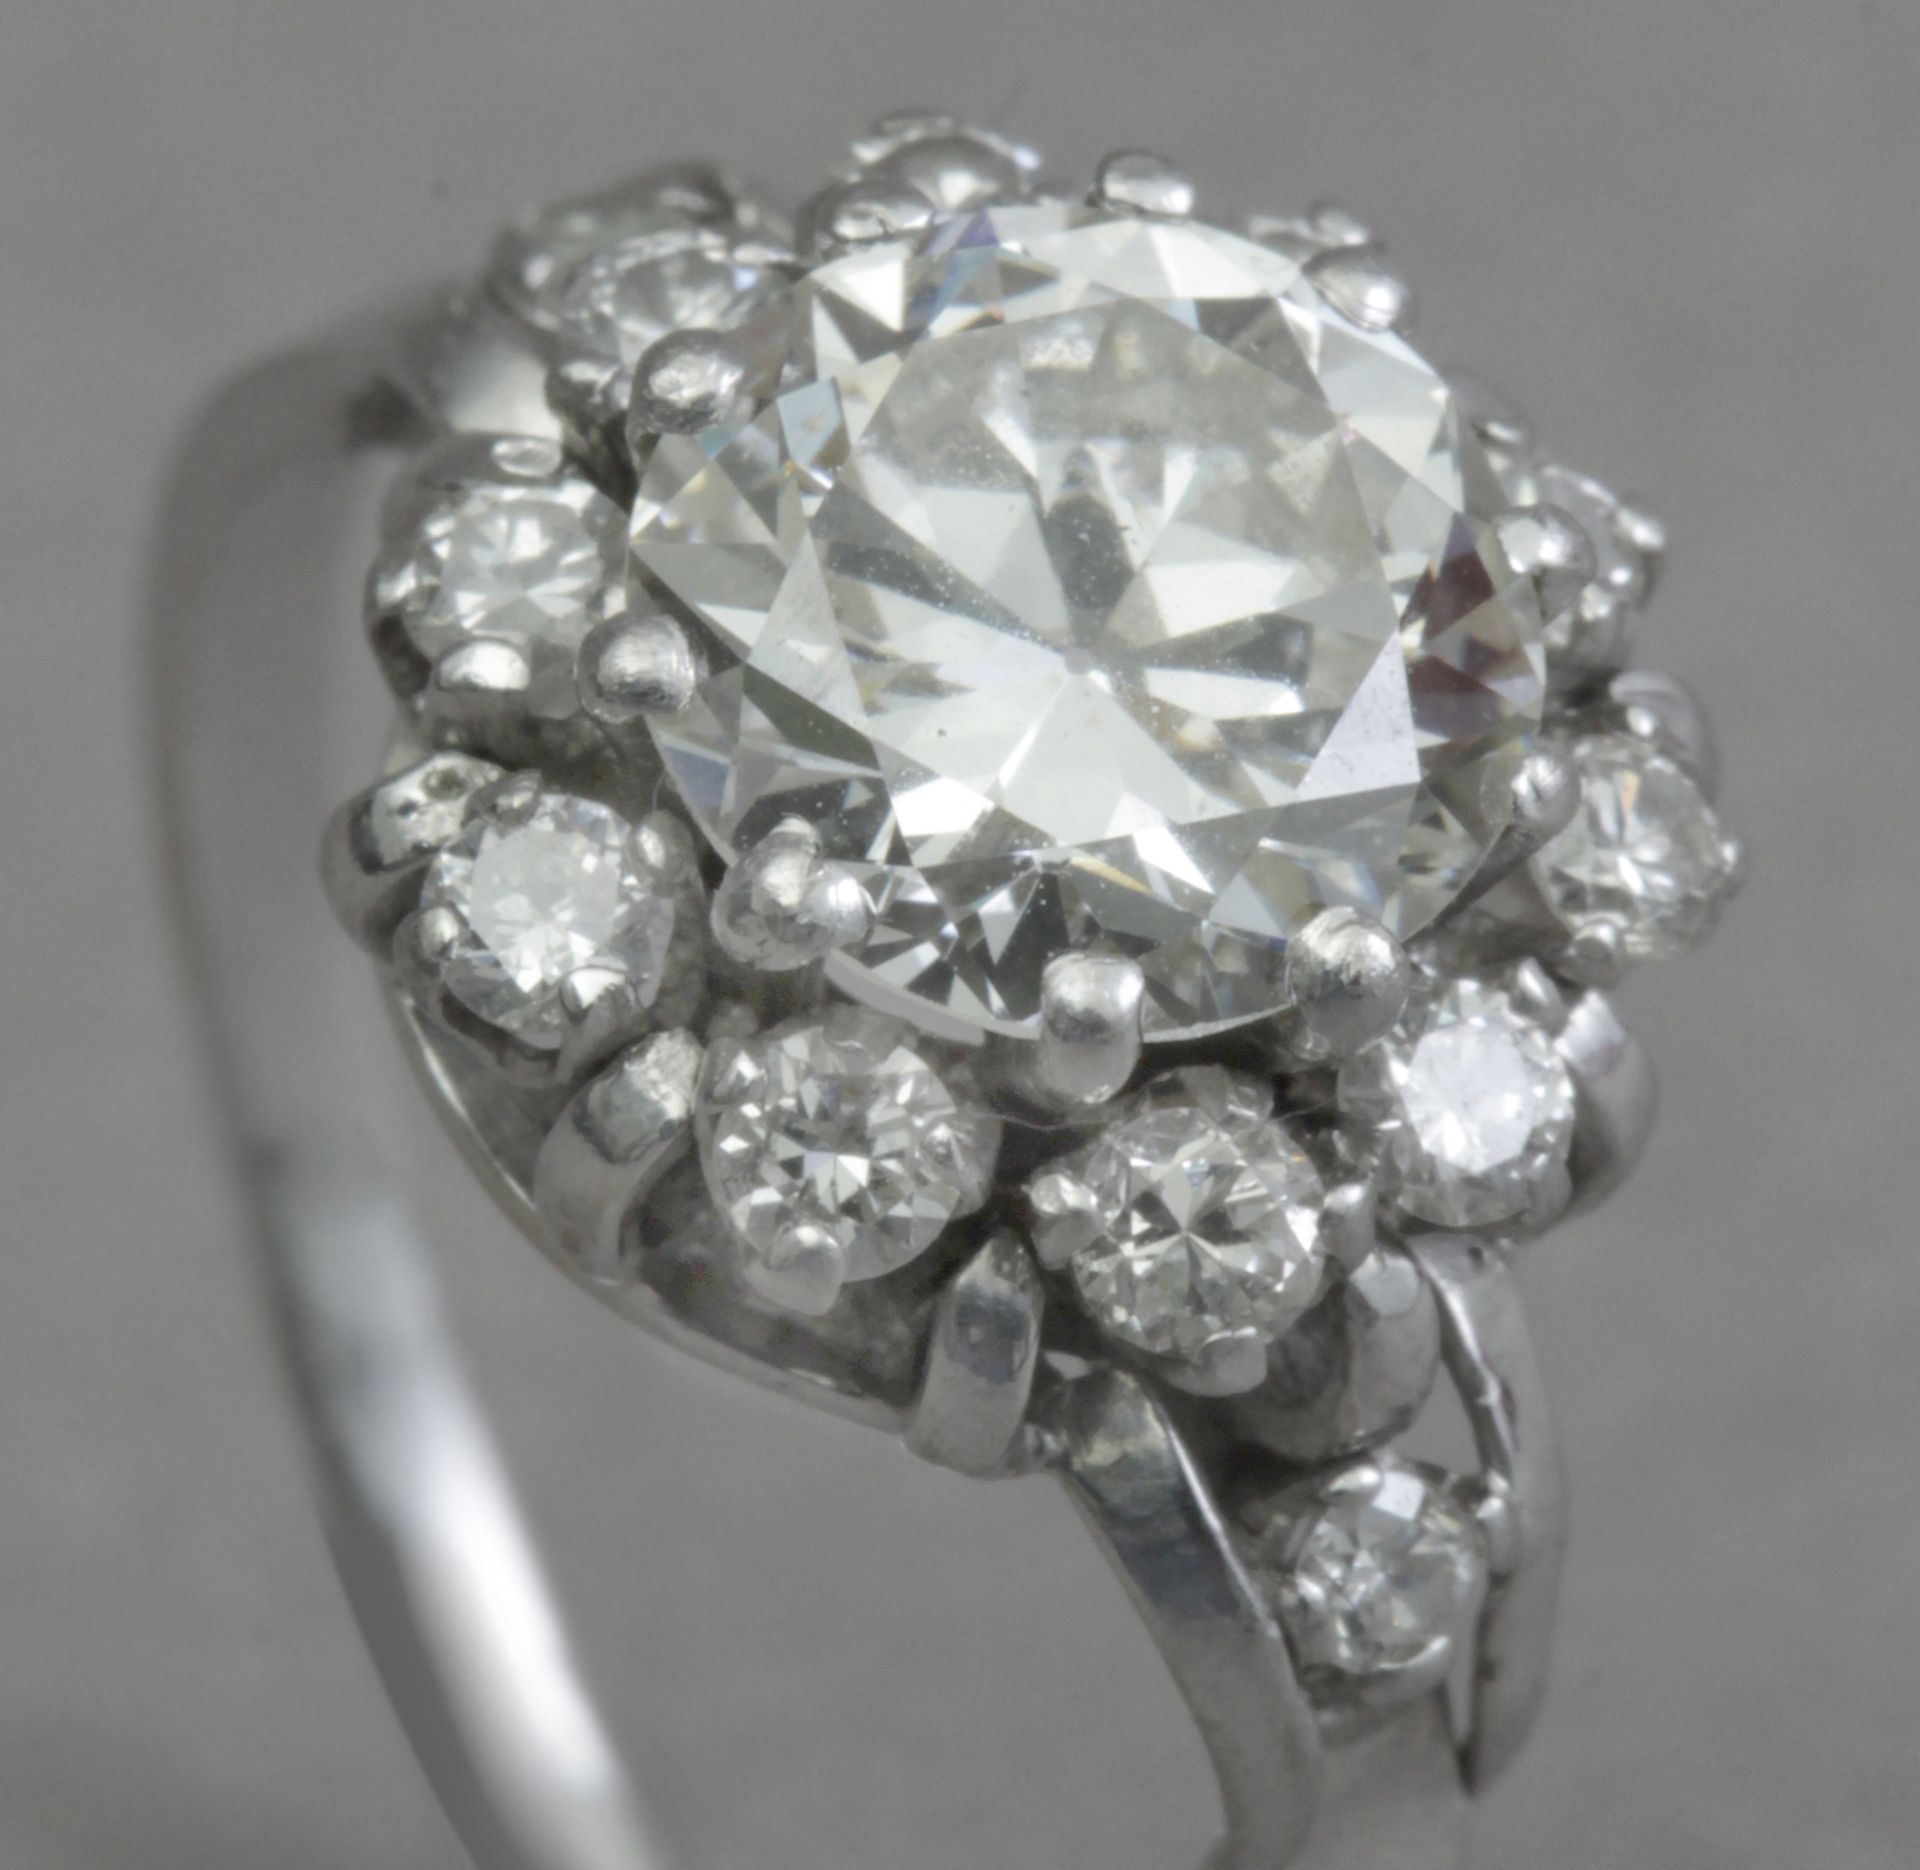 A cluster dimond ring circa 1940 with a 2,25 ct. diamonds approx. - Image 6 of 7